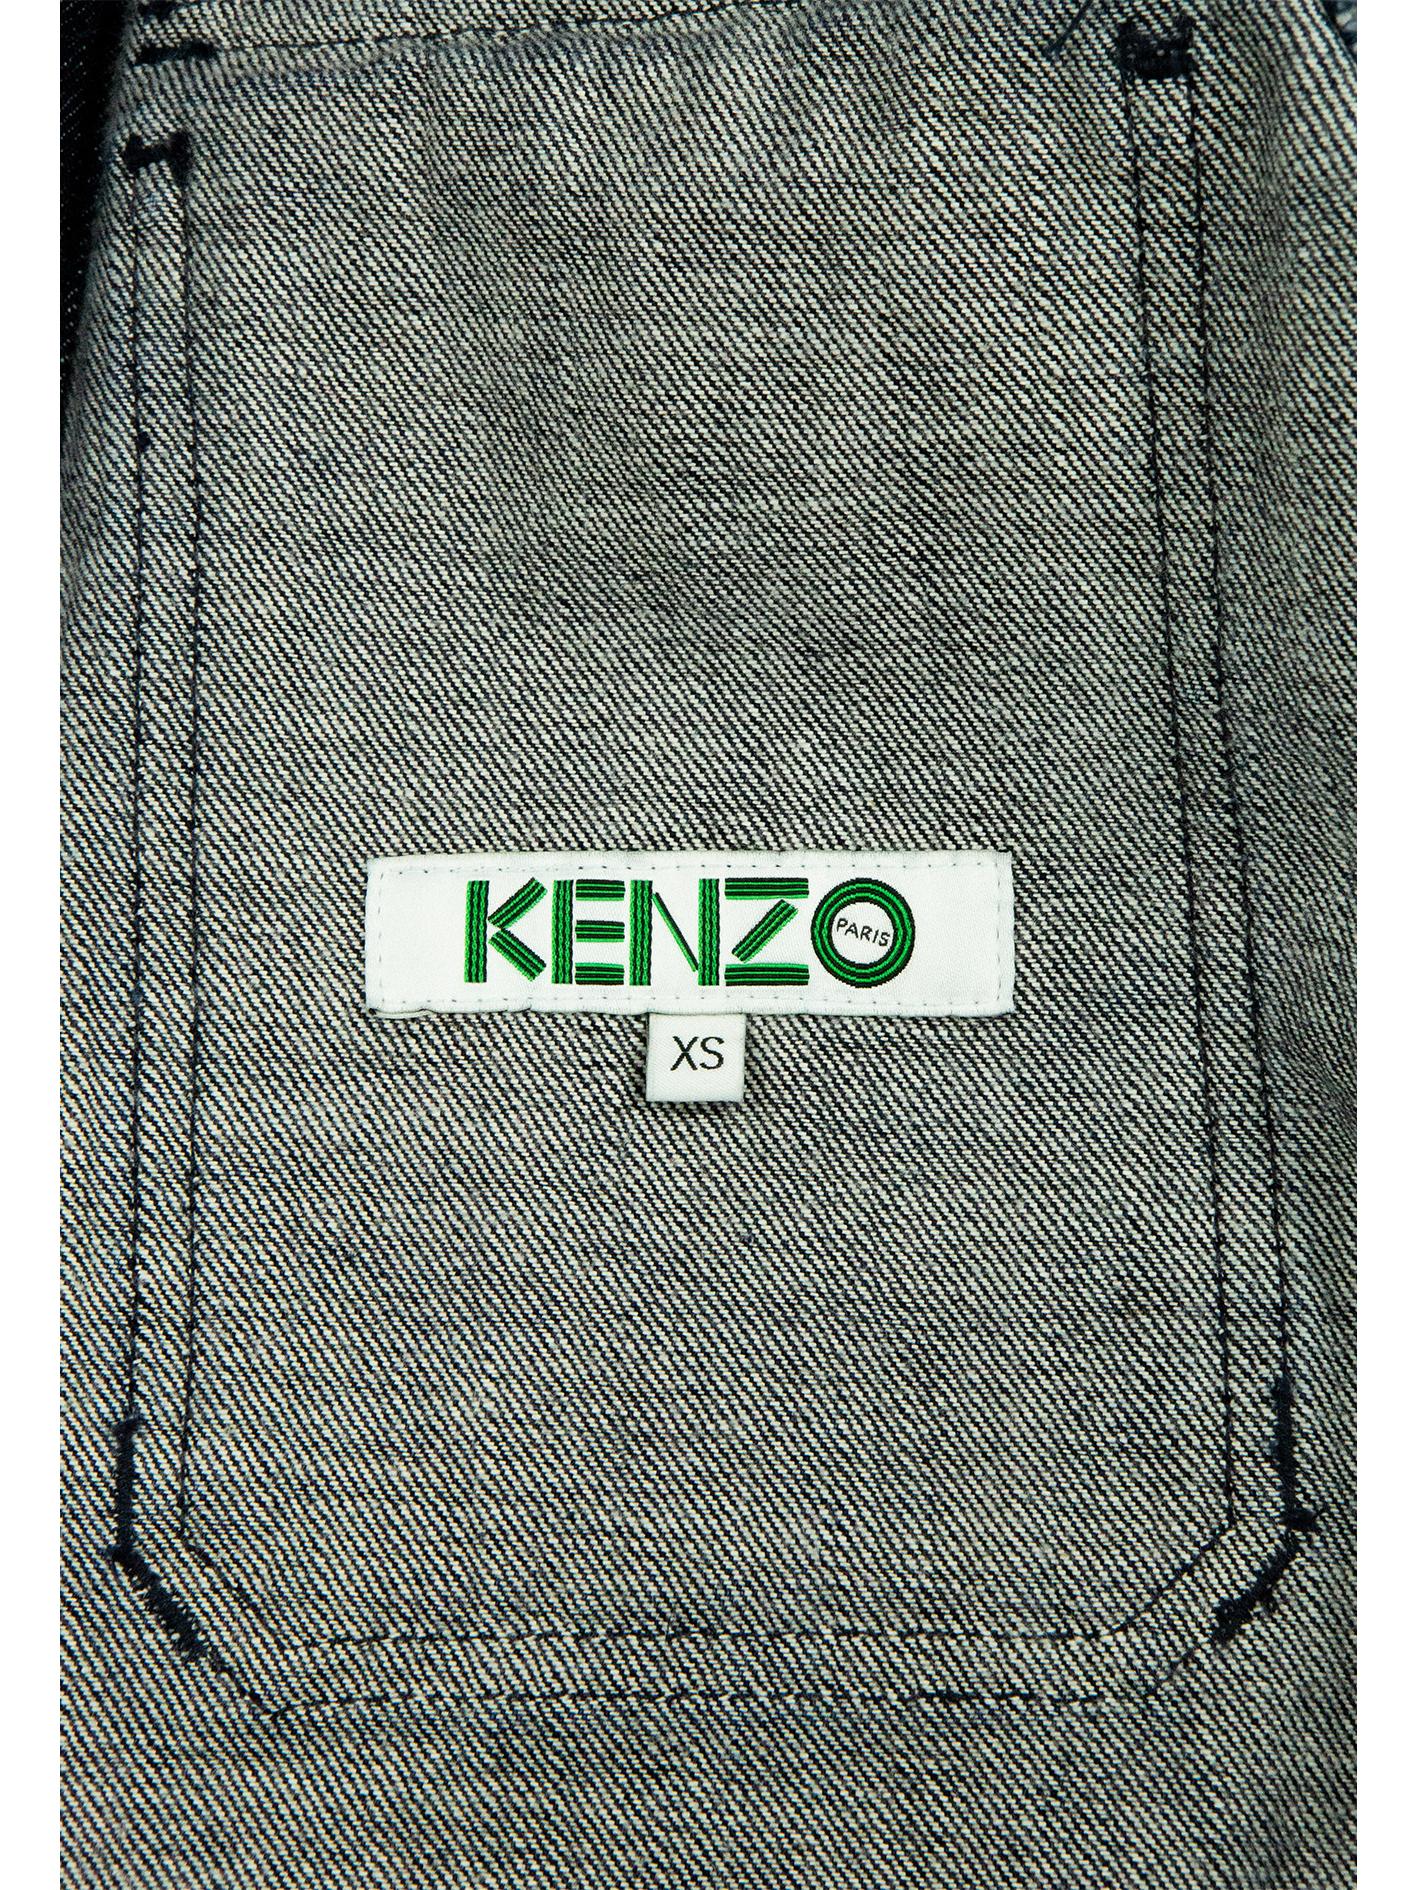 Women's Kenzo Denim Jacket With Dragon Embroidery For Sale